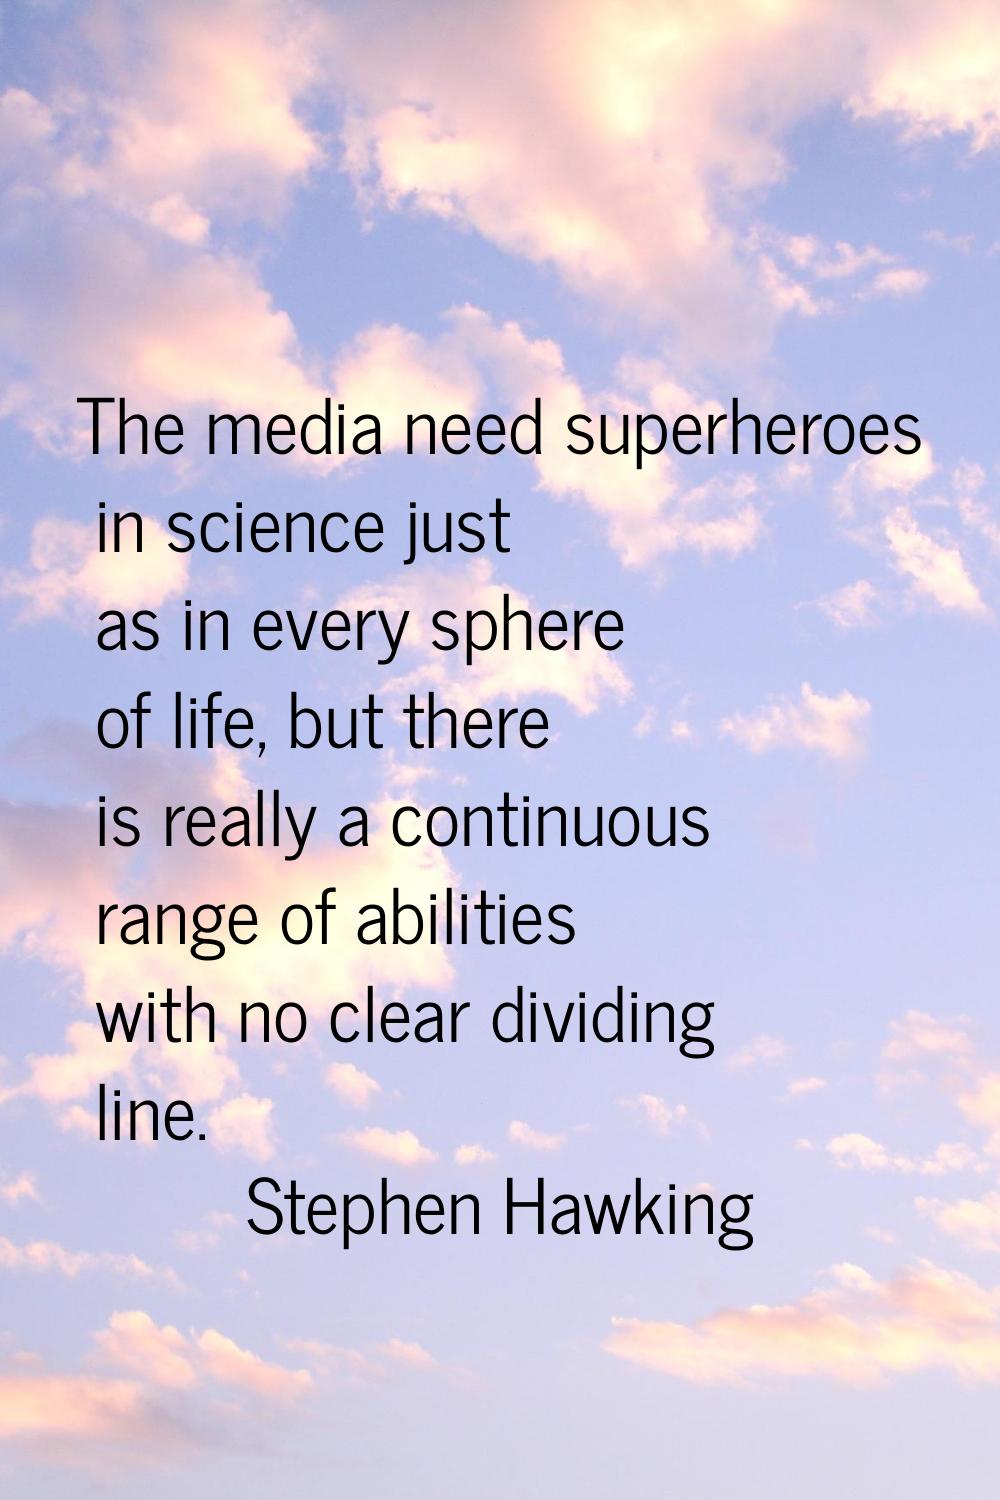 The media need superheroes in science just as in every sphere of life, but there is really a contin